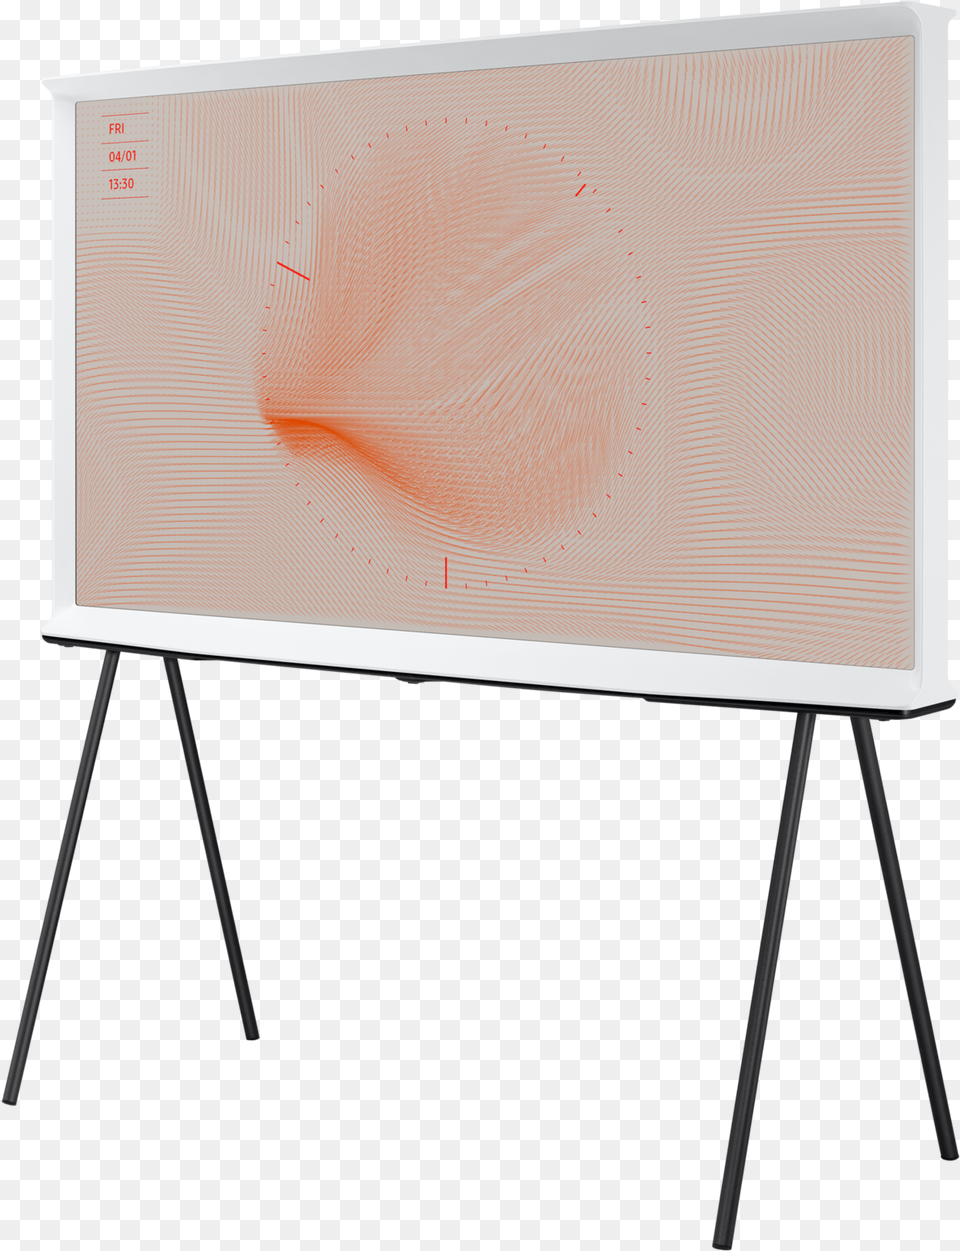 008 R Perspective White Whiteboard, Canvas, White Board Png Image